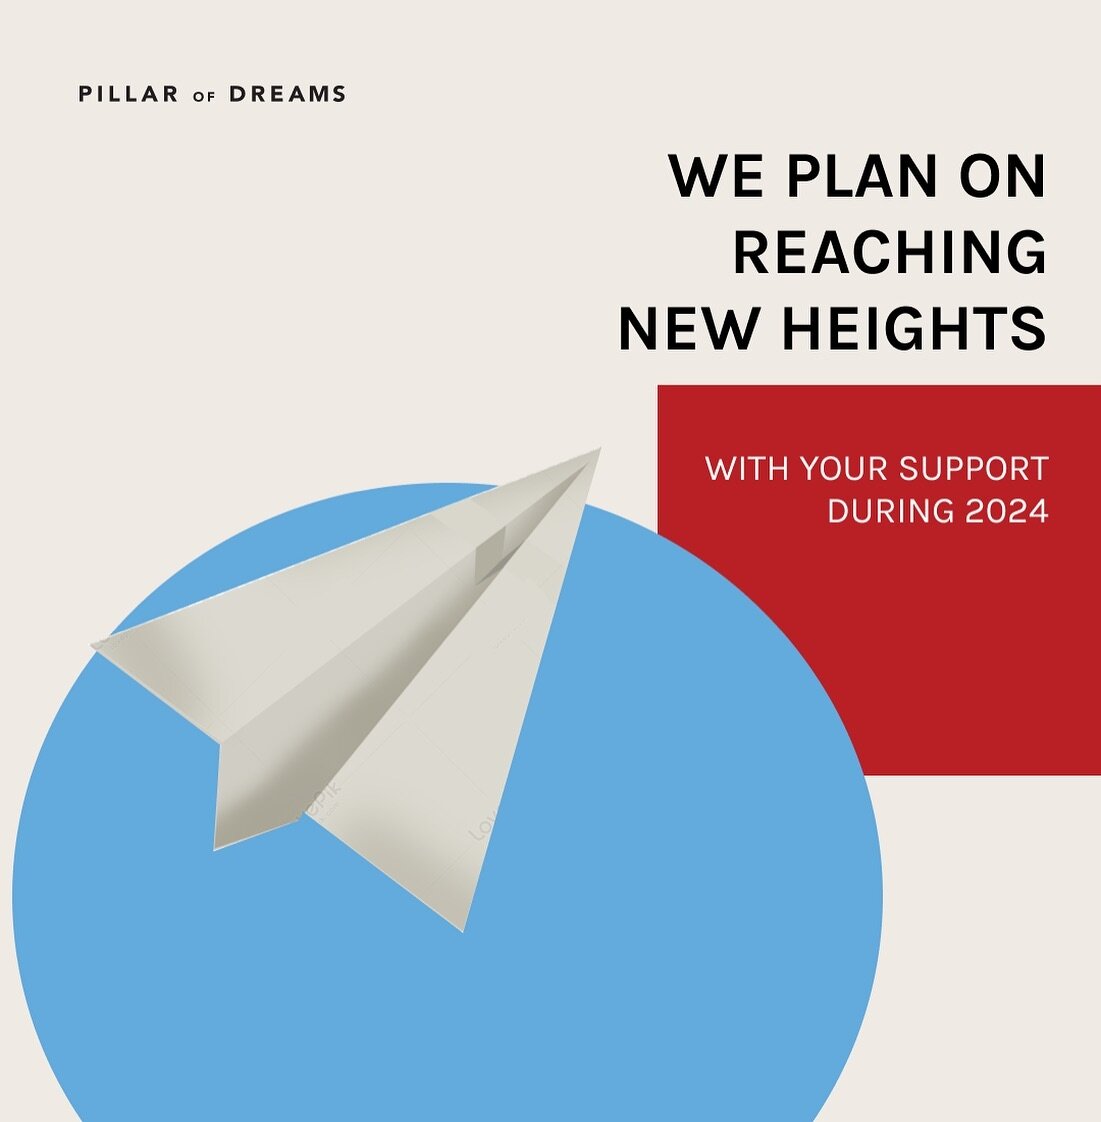 Let&rsquo;s unite forces during 2024 to reach new heights! 🚀⚡️ We&rsquo;re excited about all of the plans for this year. Thank you for joining us in making a change.